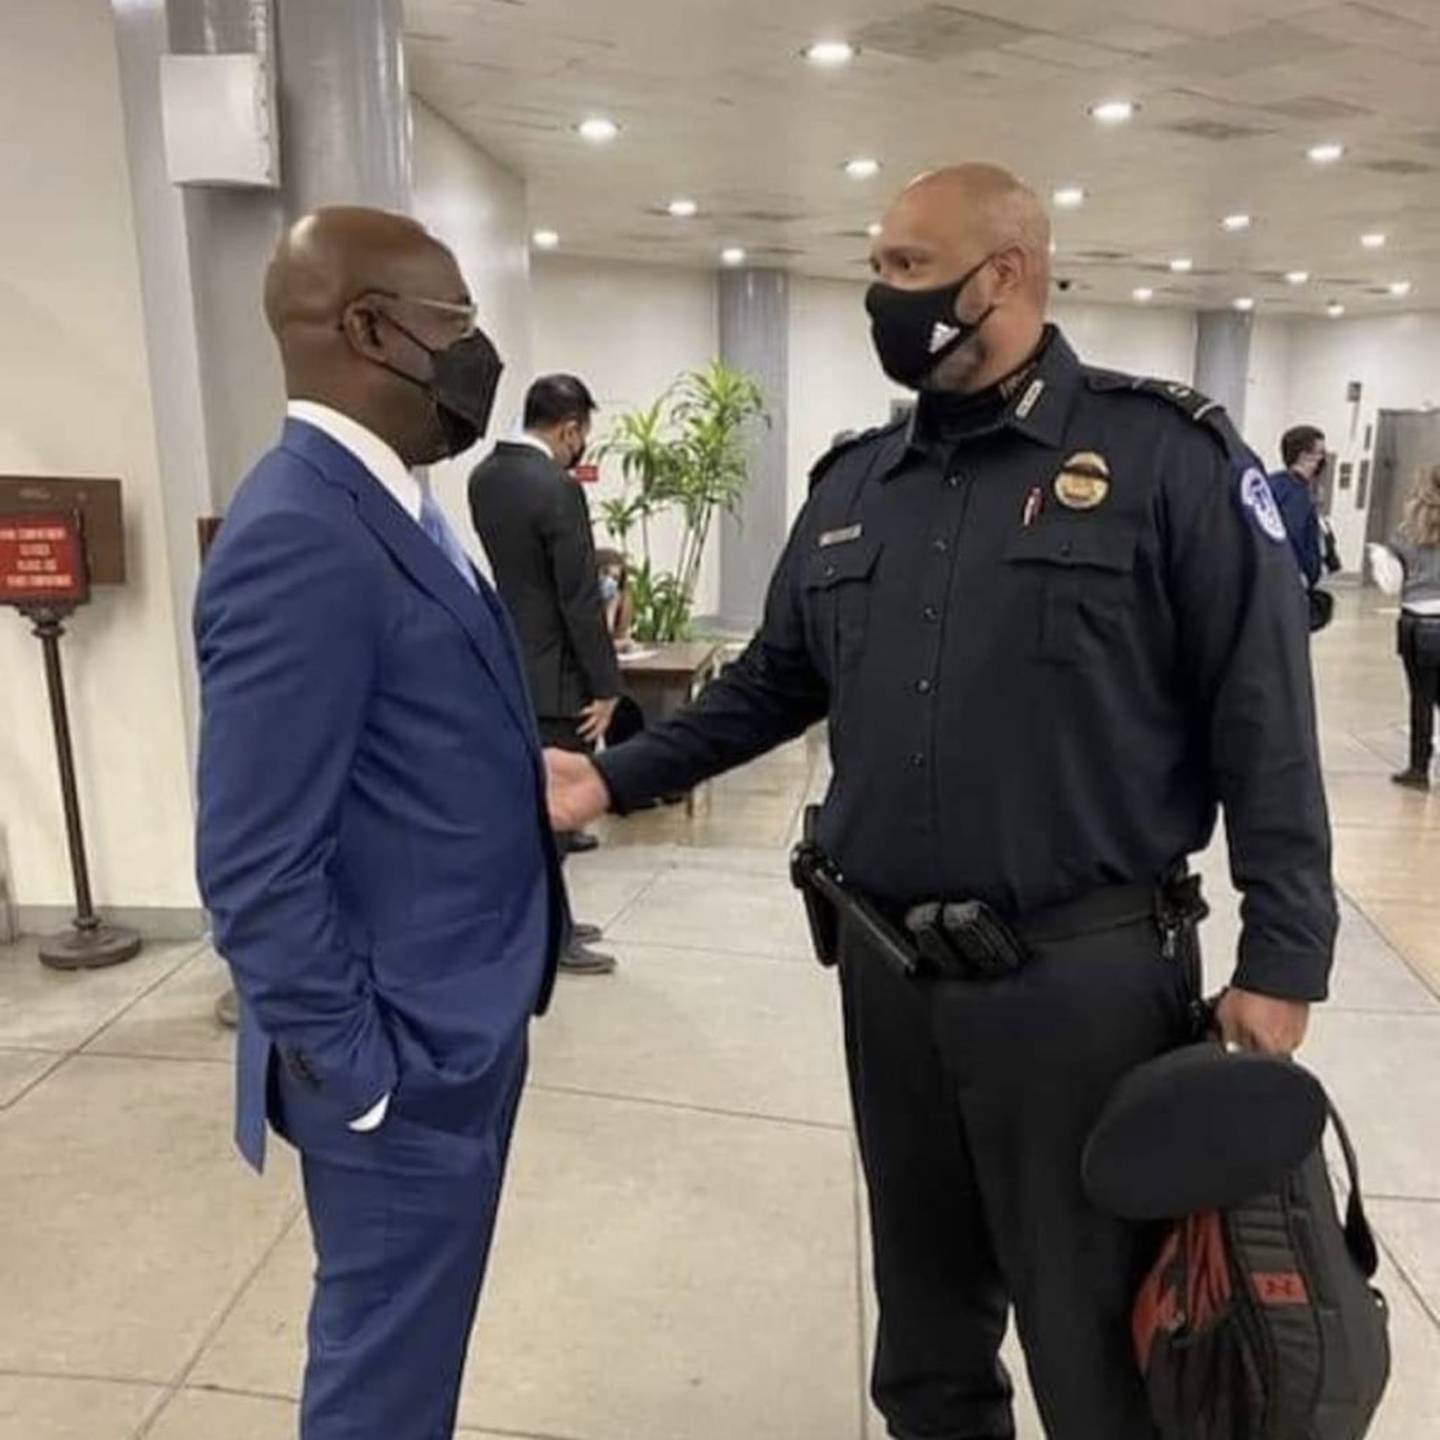 Capitol Police Officer Harry Dunn (right) greets Georgia Sen. Raphael Warnock, who he helped raise money for over the weekend with a series of fun "Thirst Tweets."